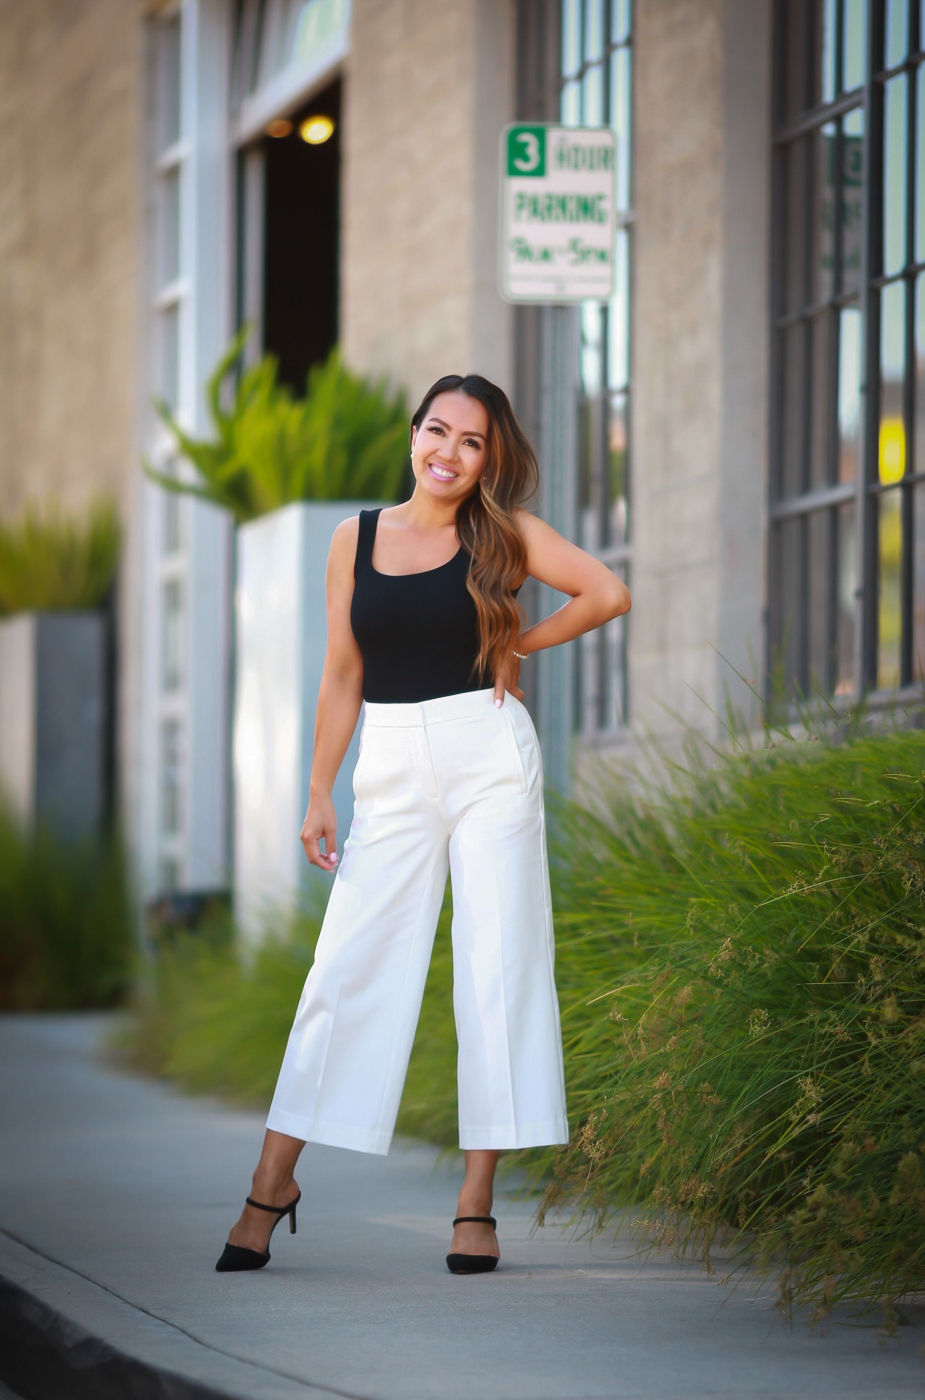 How To Wear Wide Leg Pants With Confidence When Petite - Beth